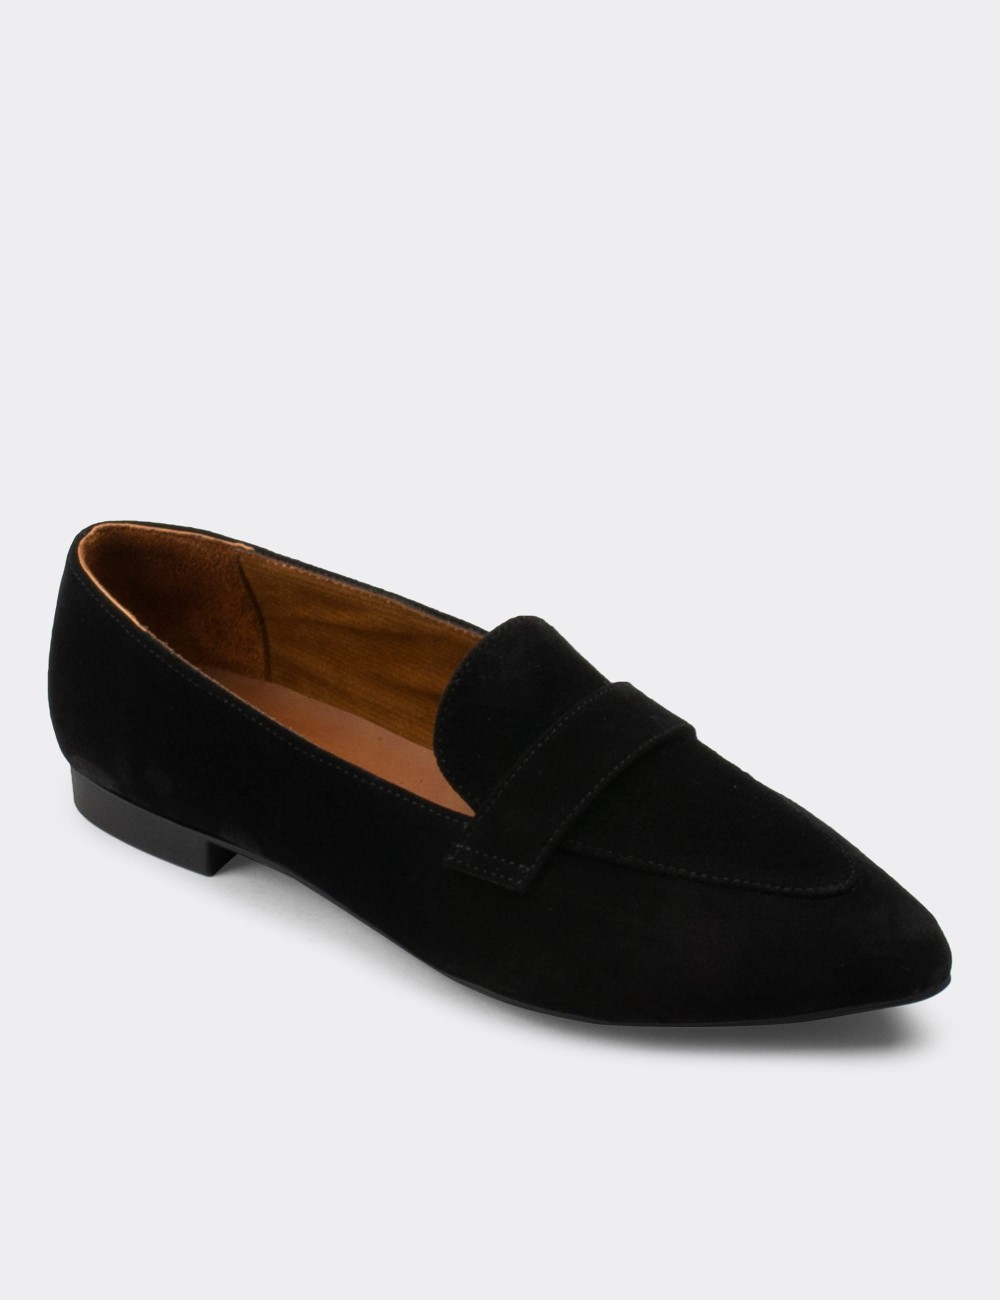 Black Suede Leather Loafers - 01897ZSYHC01